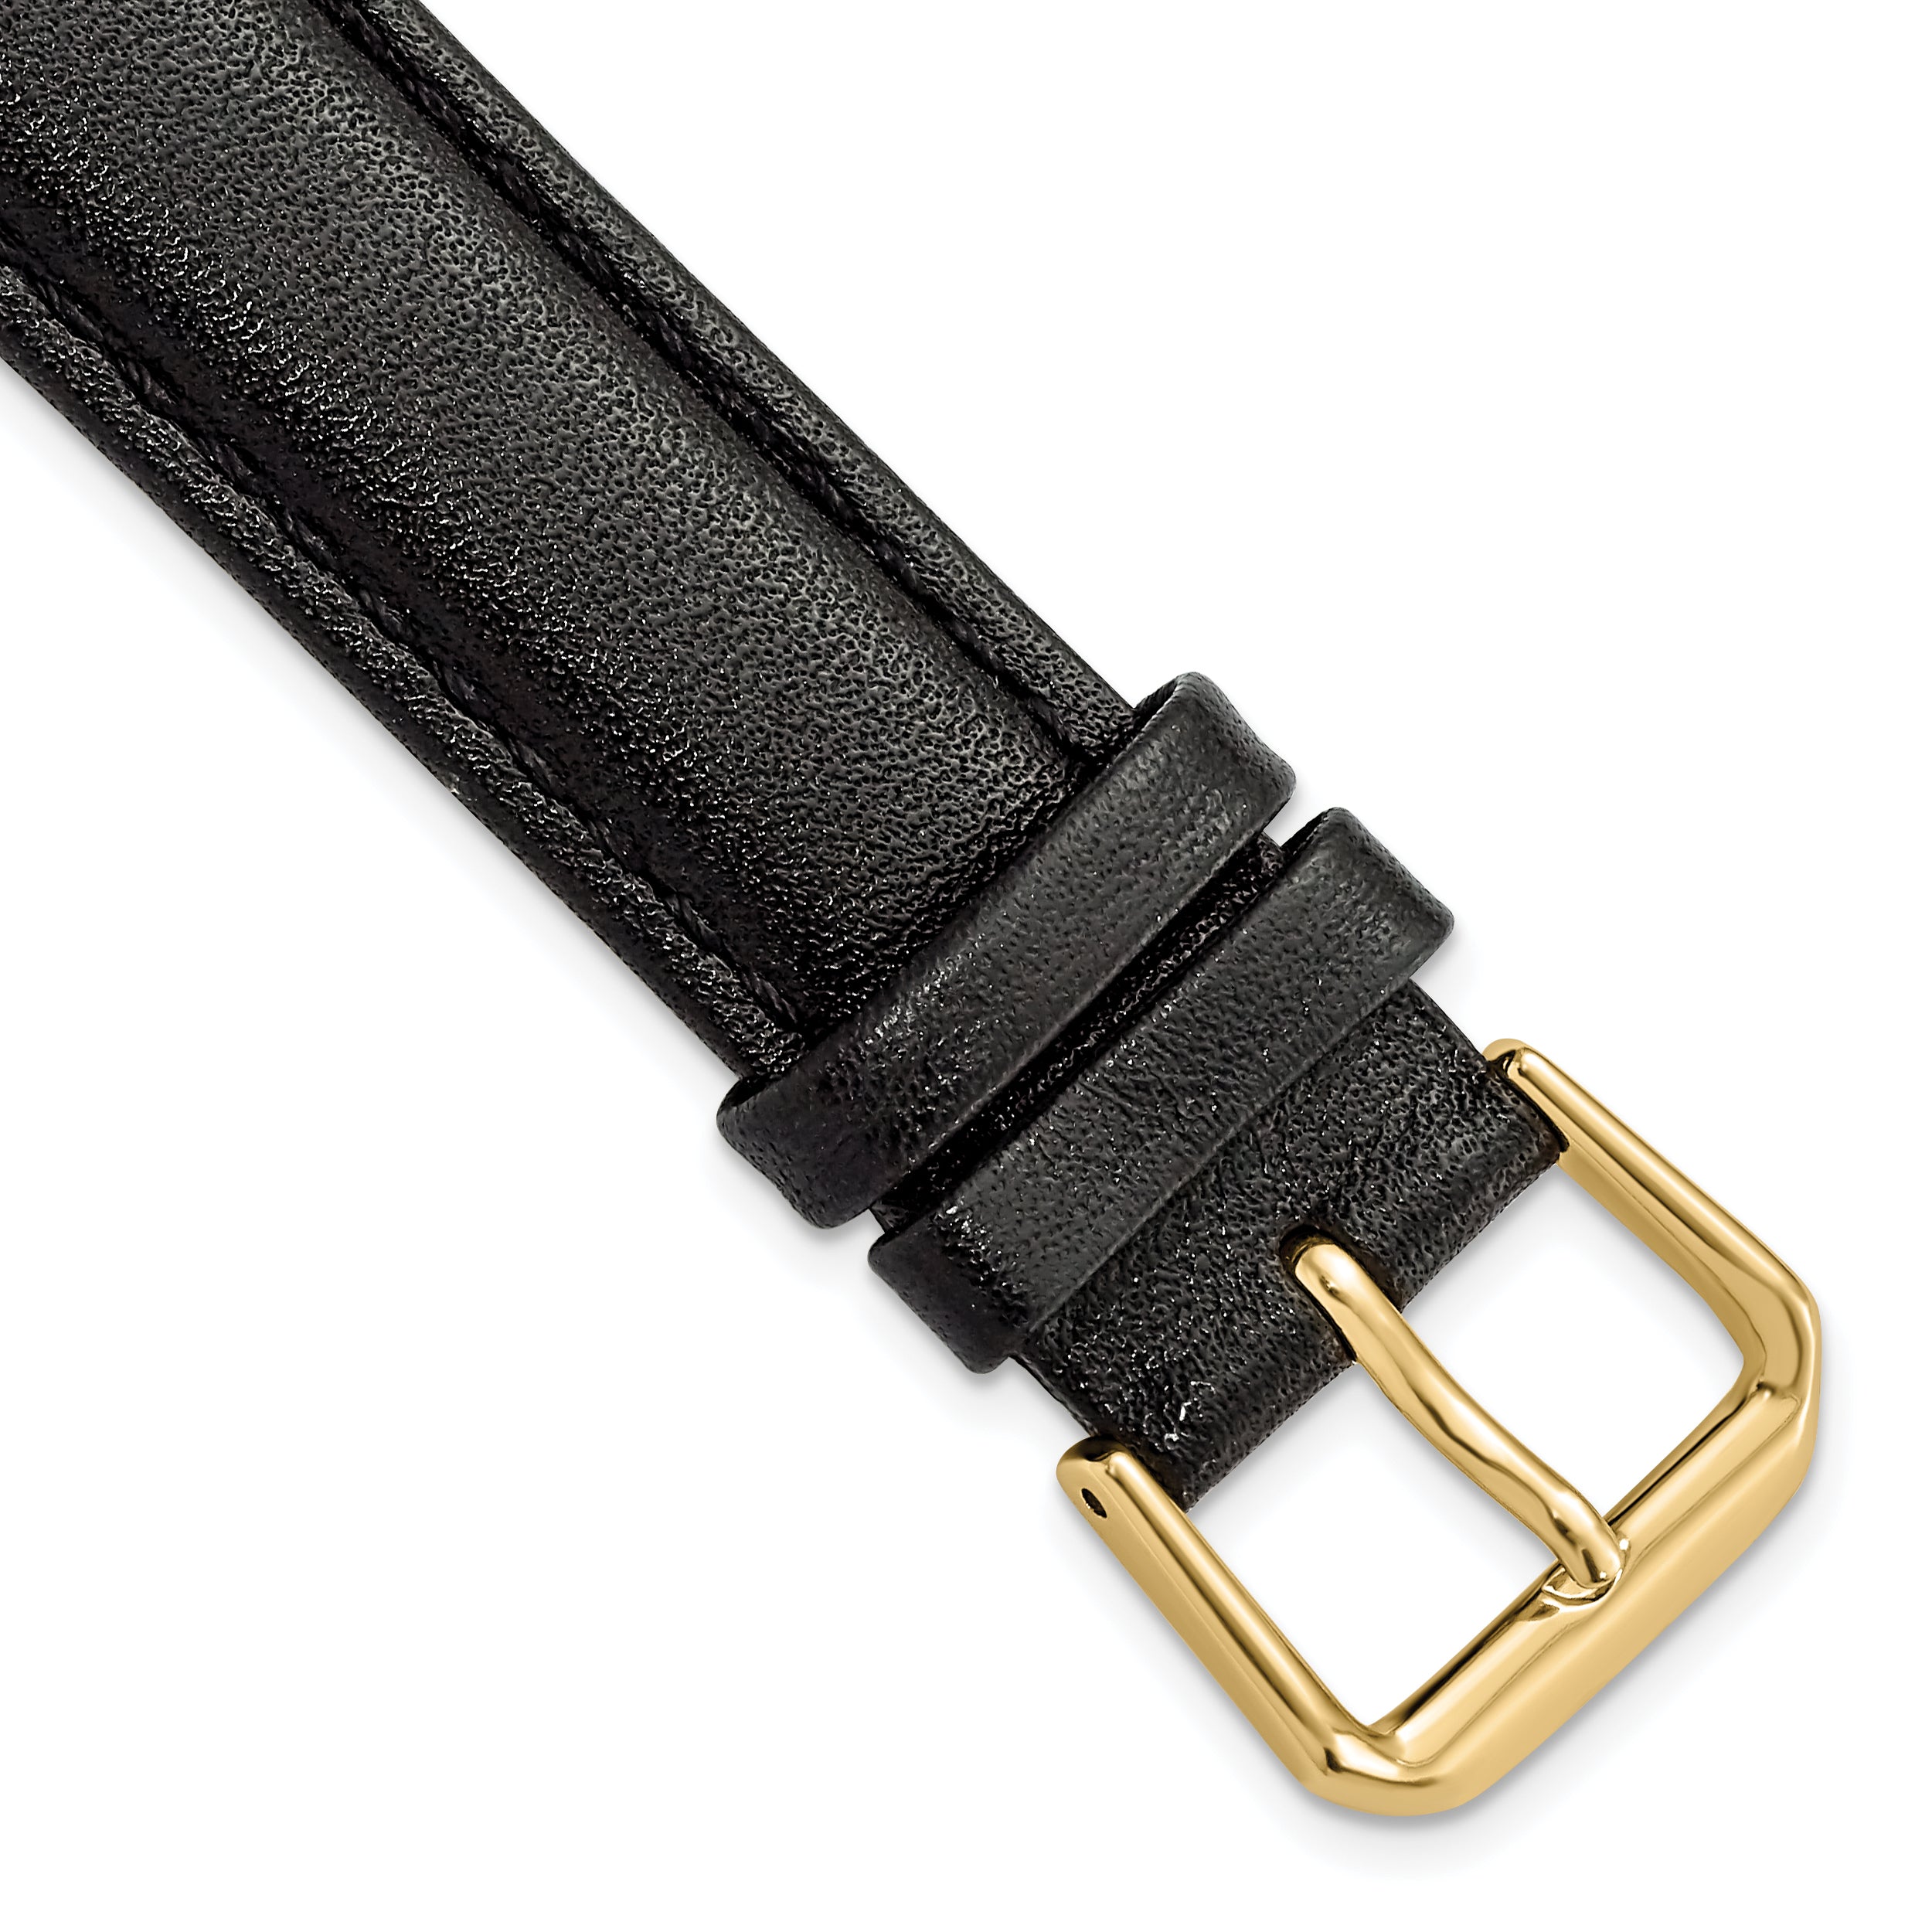 DeBeer 18mm Black Long Smooth Leather with Gold-tone Buckle 8.5 inch Watch Band